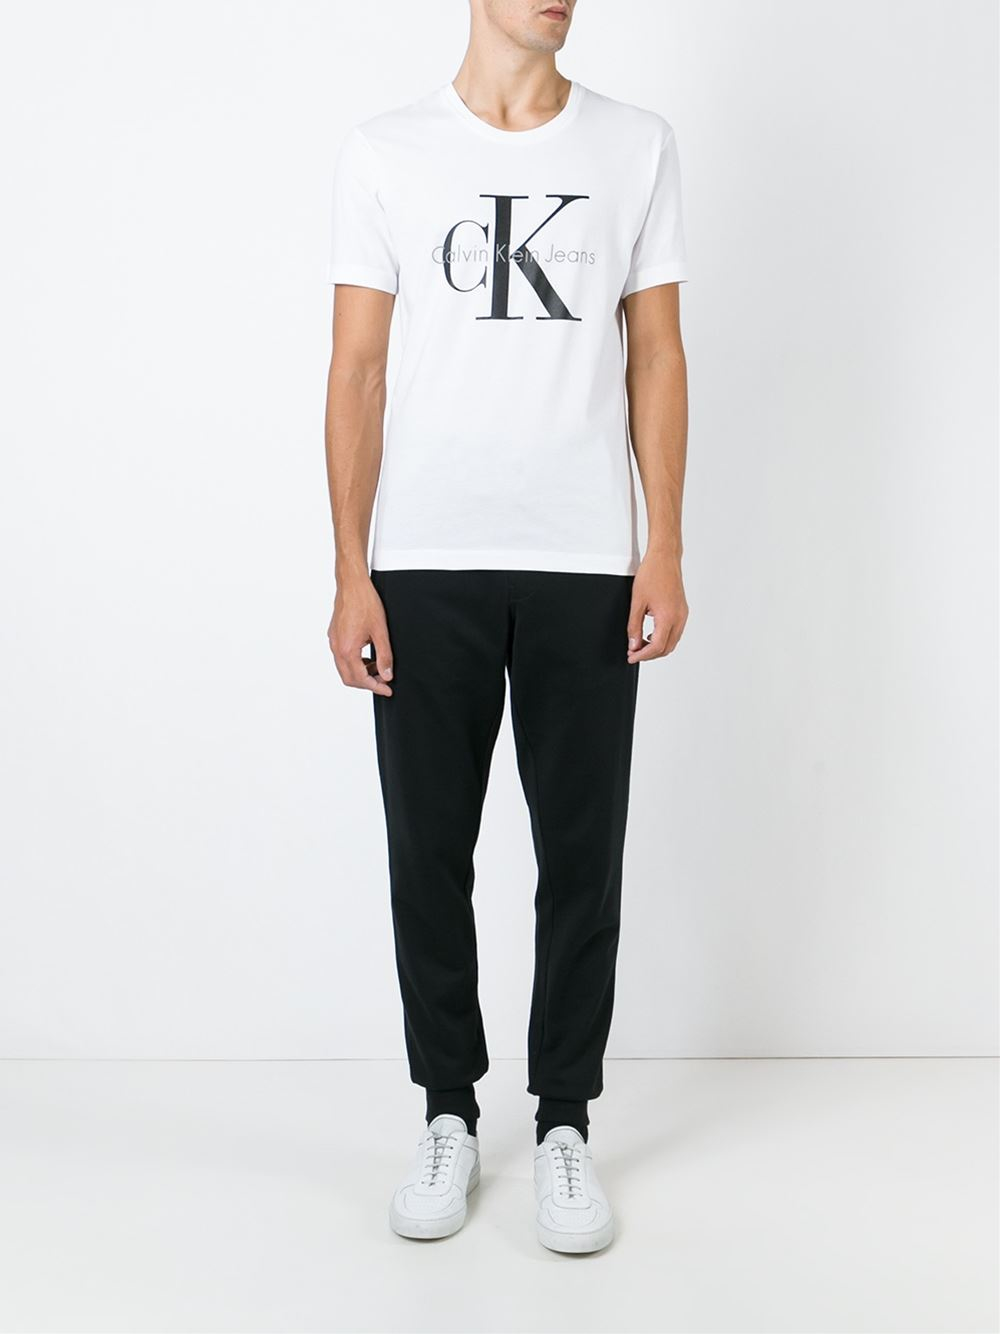 Calvin Klein Jeans T-Shirts for Men - Shop Now at Farfetch Canada